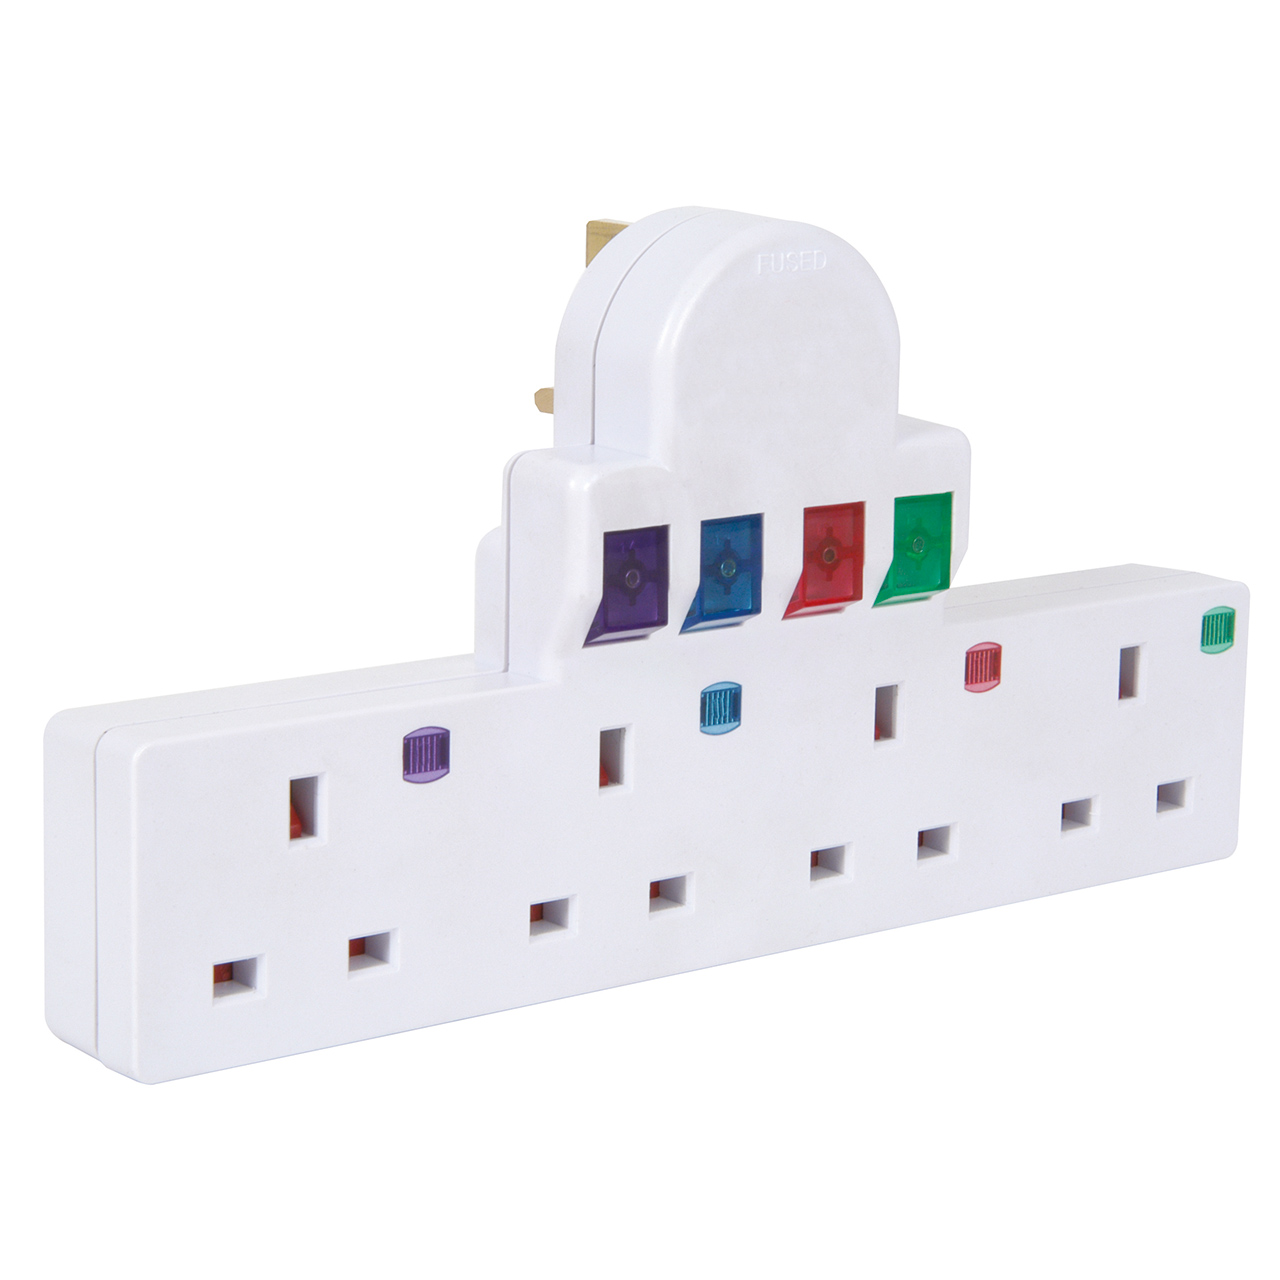 4-way Mains Adapter with Colour Coding